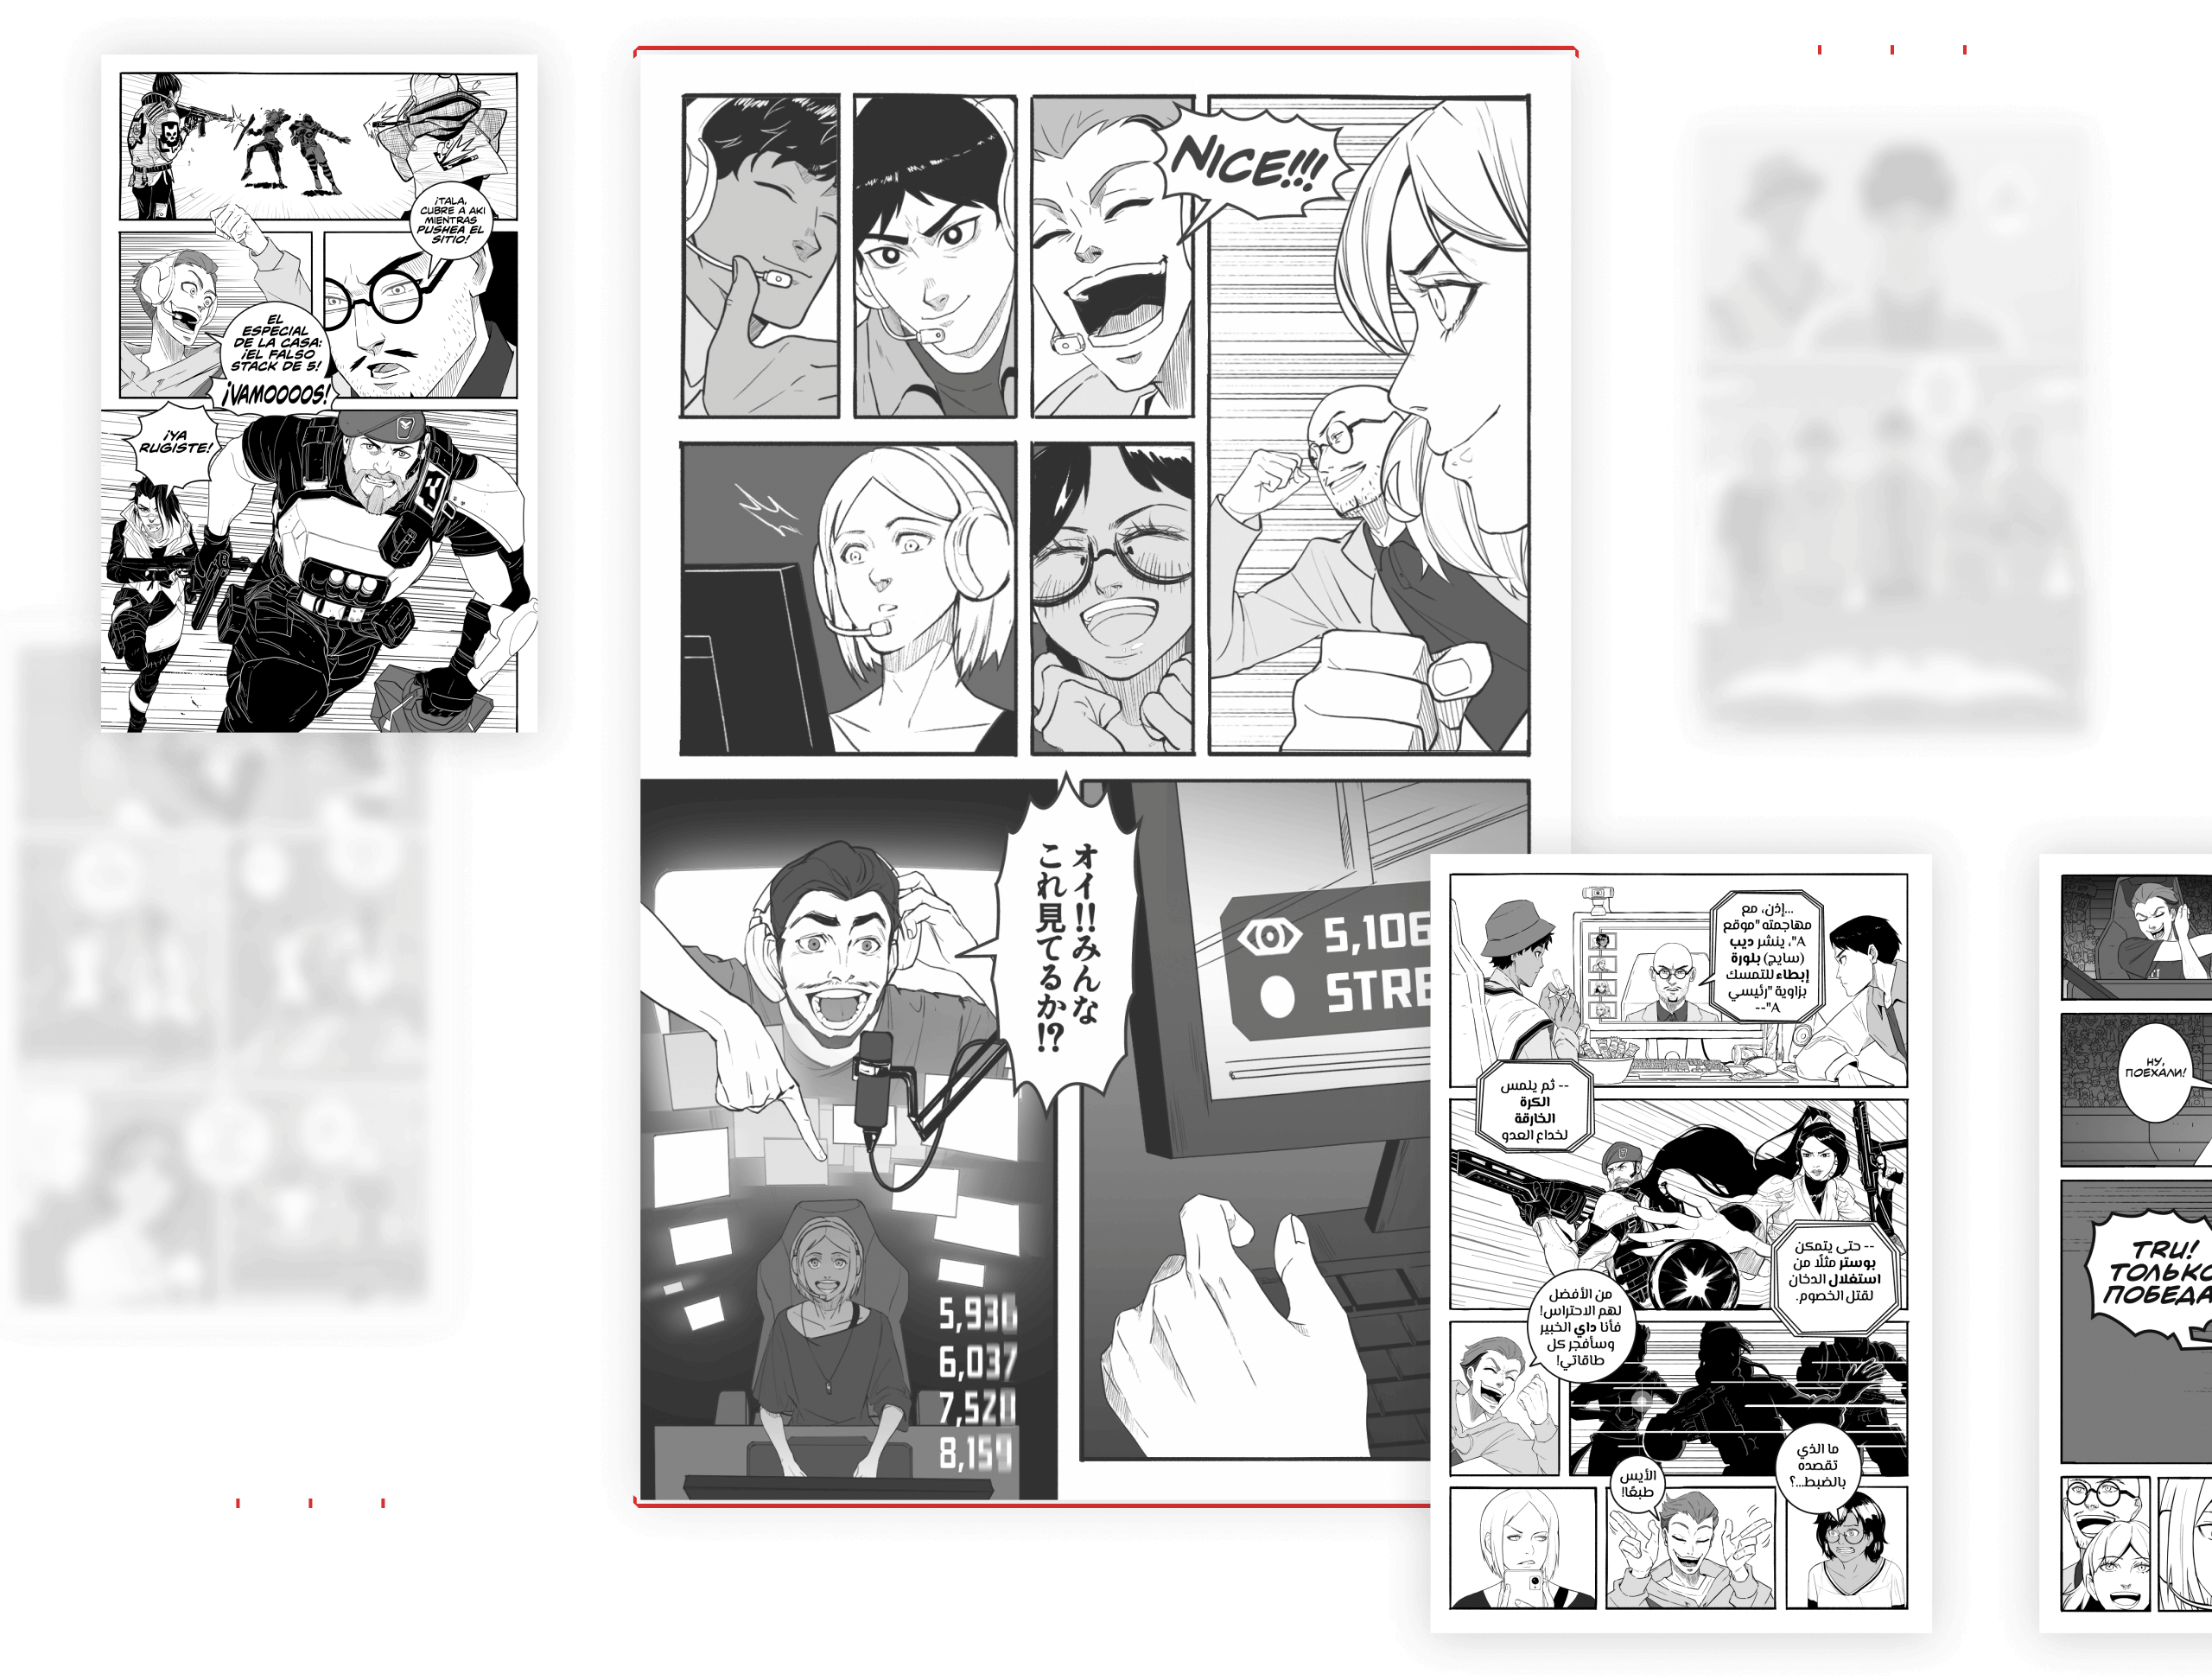 Snapshots of VCT Manga in multiple languages.